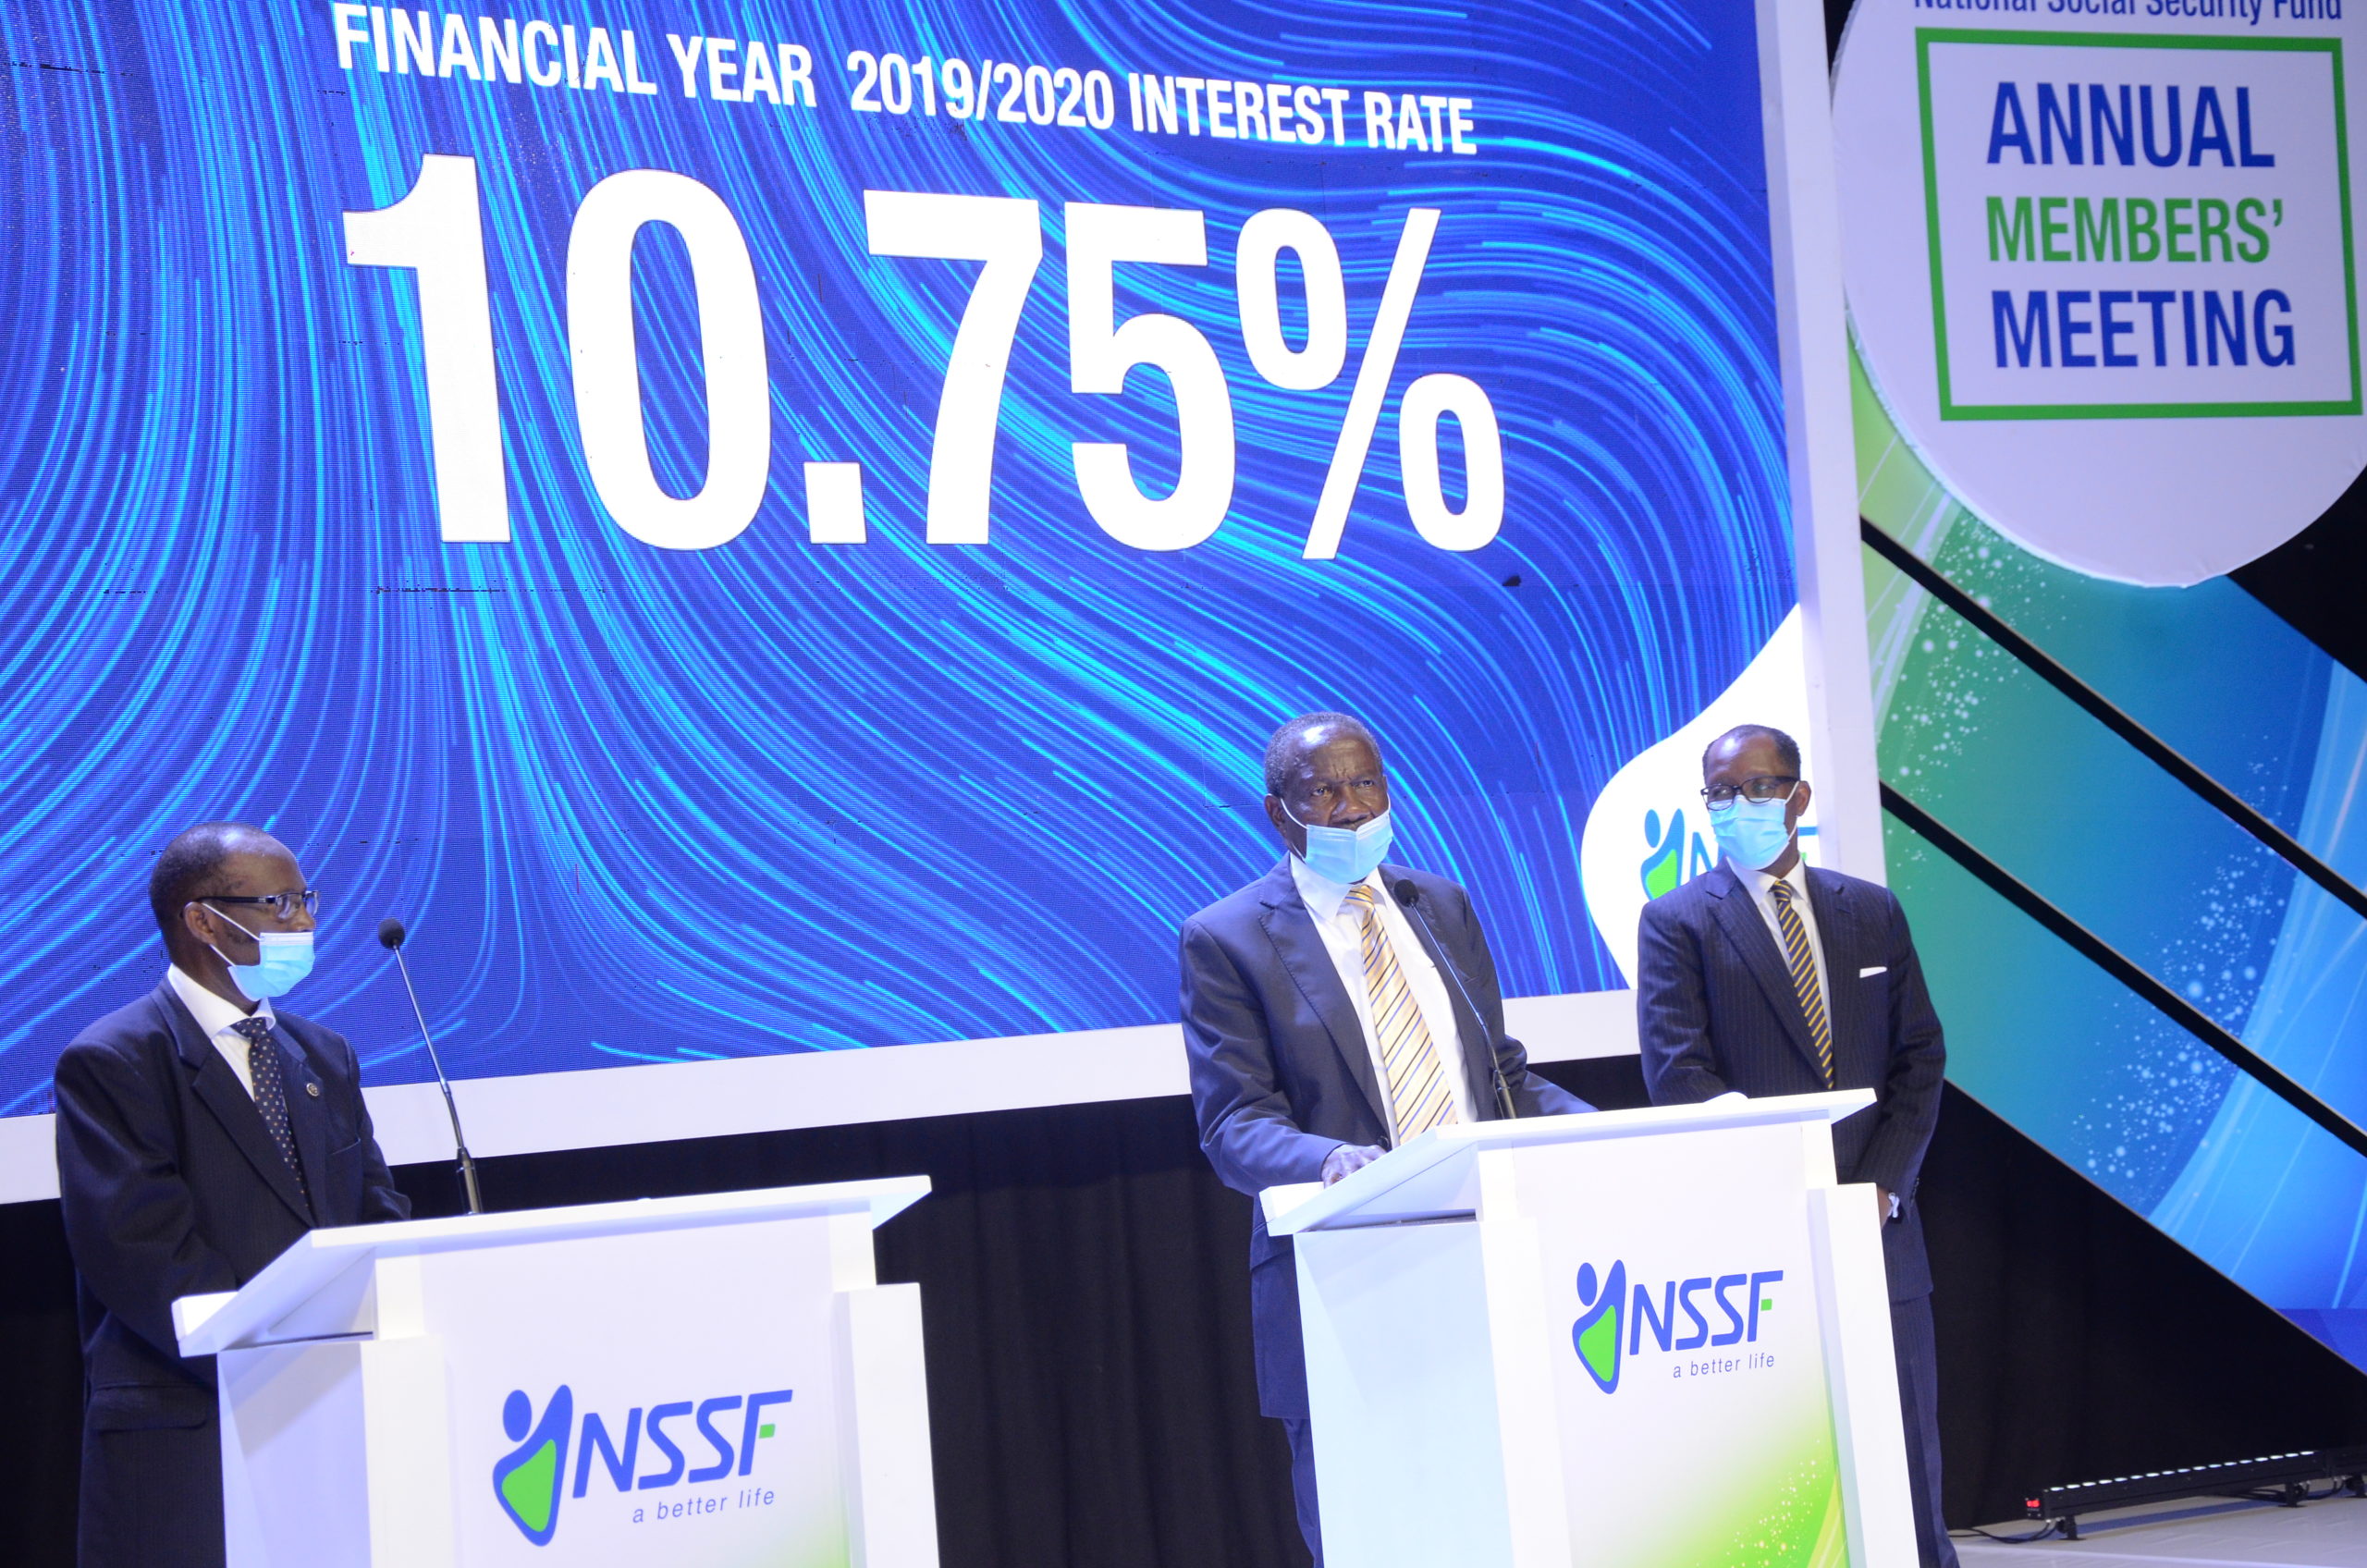 NSSF maintains double-digit interest rate in sign of Fund’s resilience